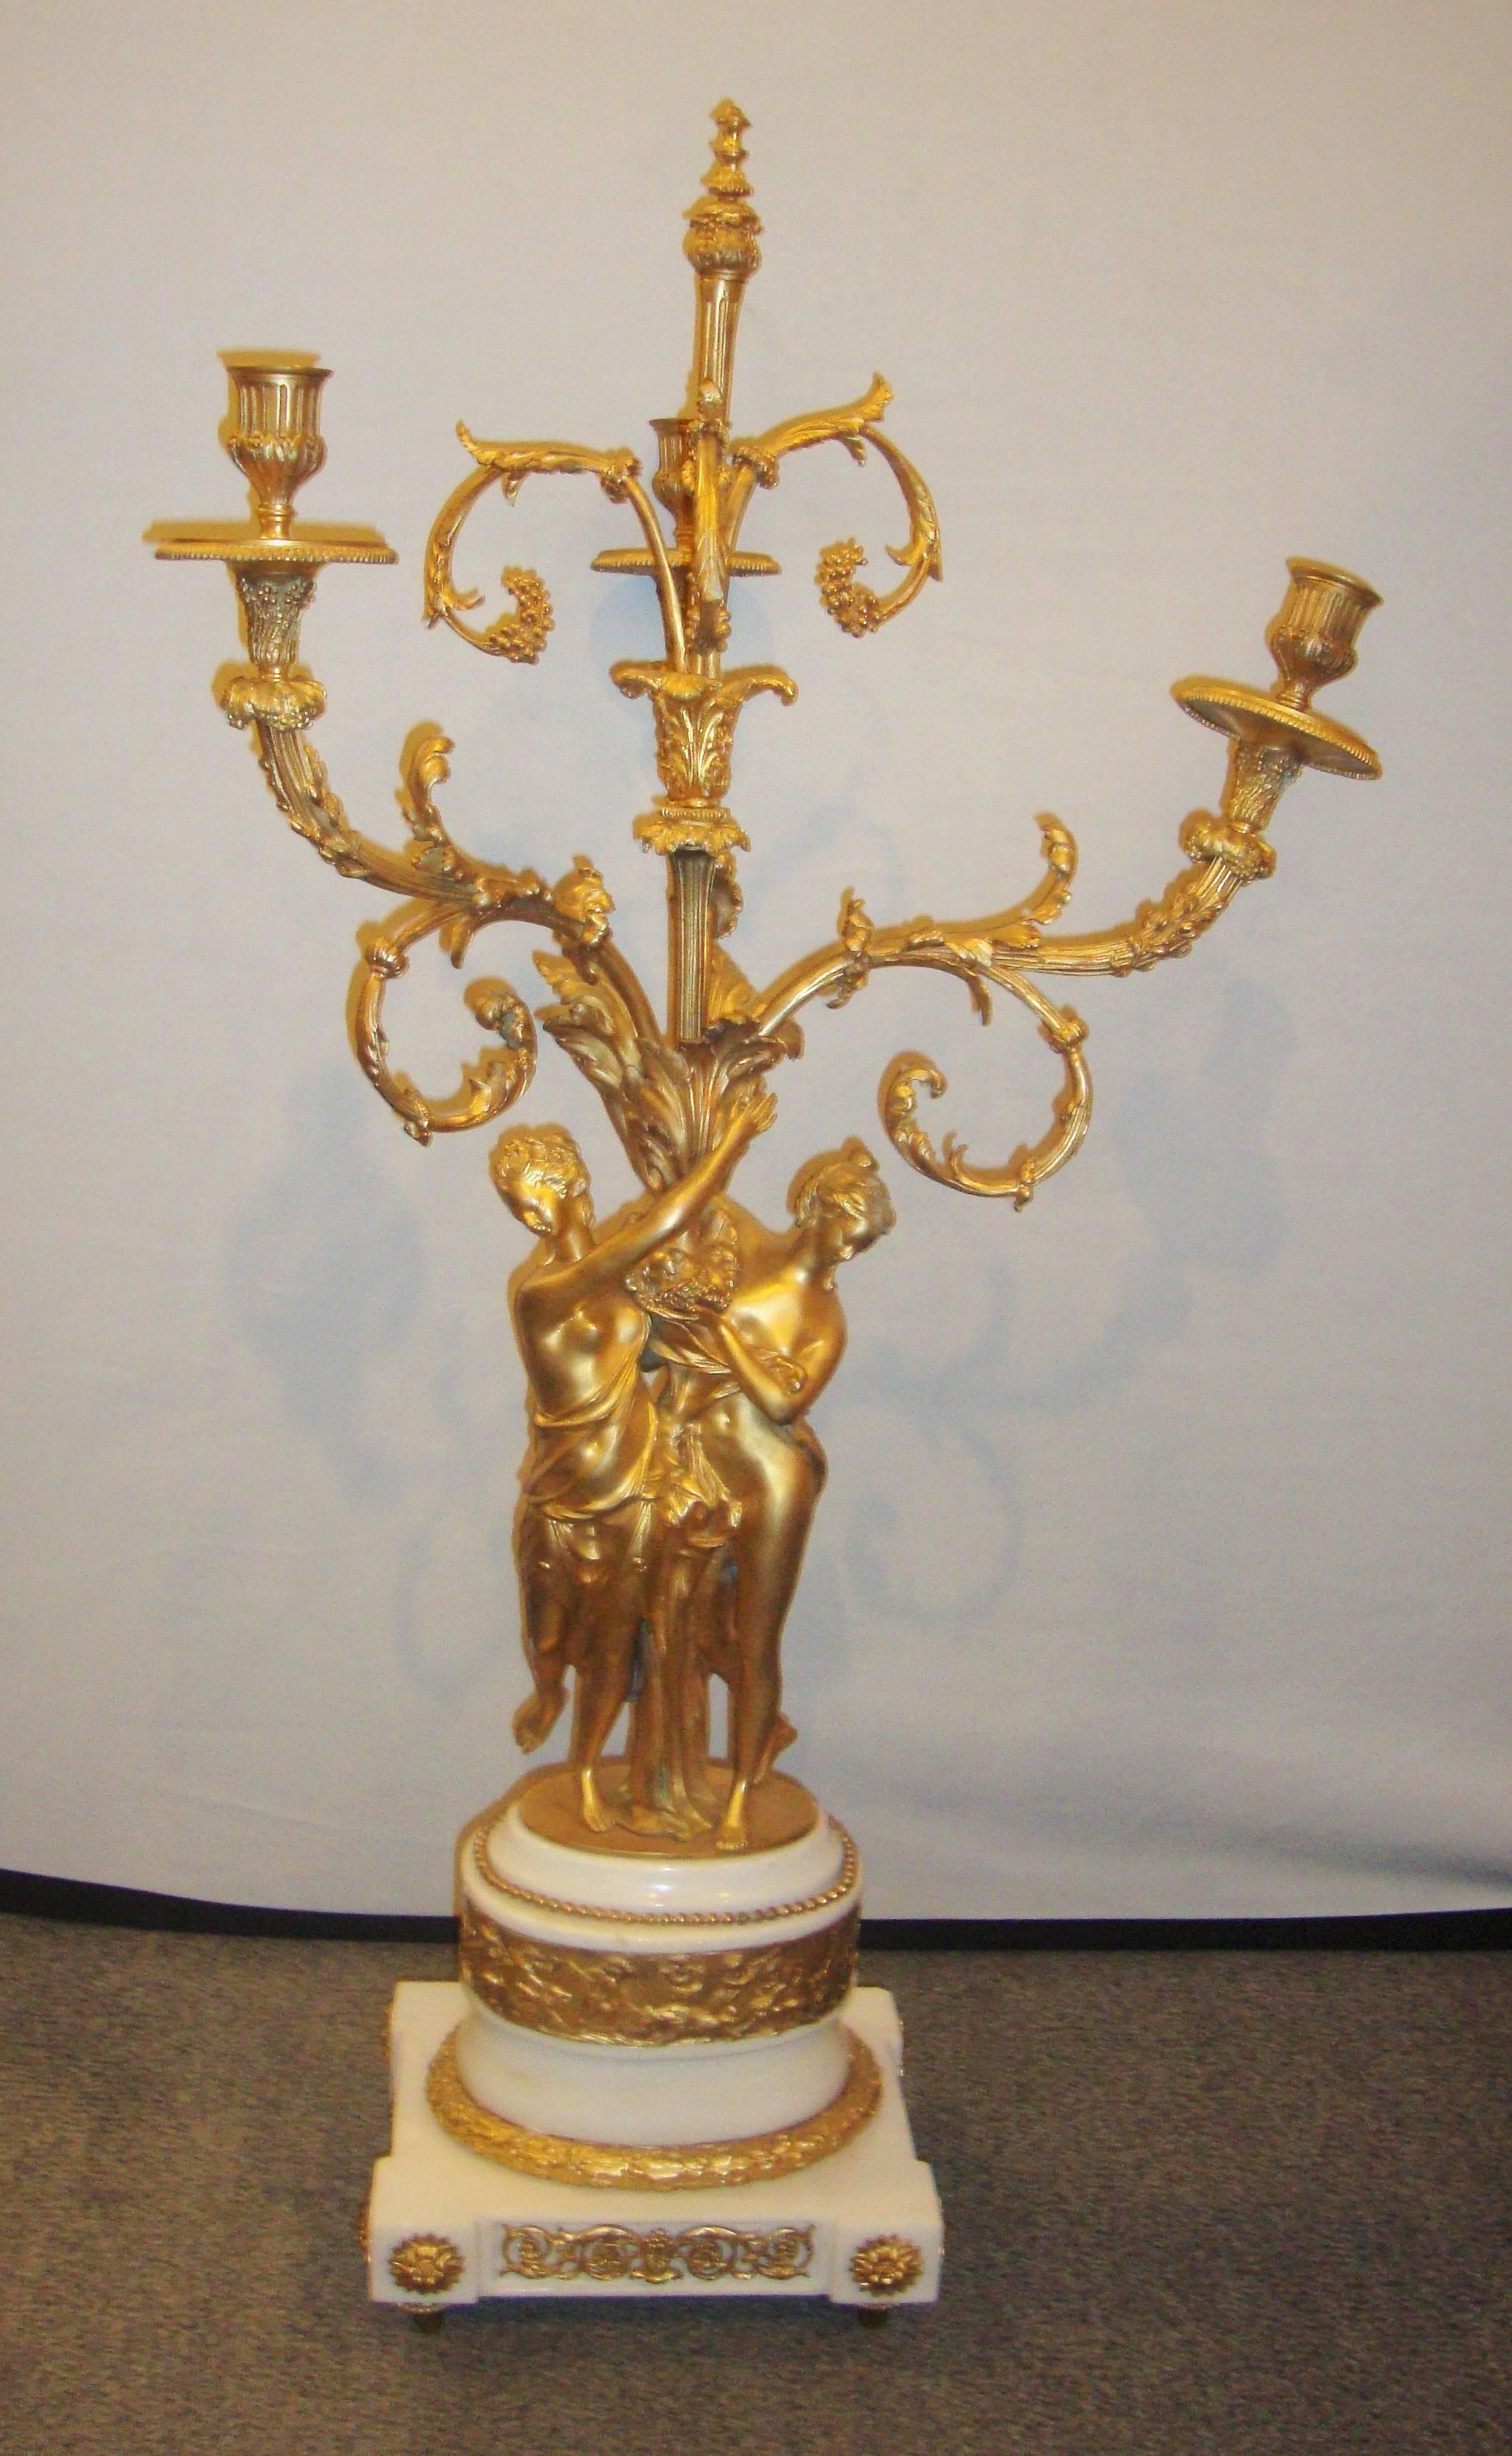 Pair of figural bronze candelabras on marble bases. Each having a pair of neoclassical full bodied woman holding up a candelabra.